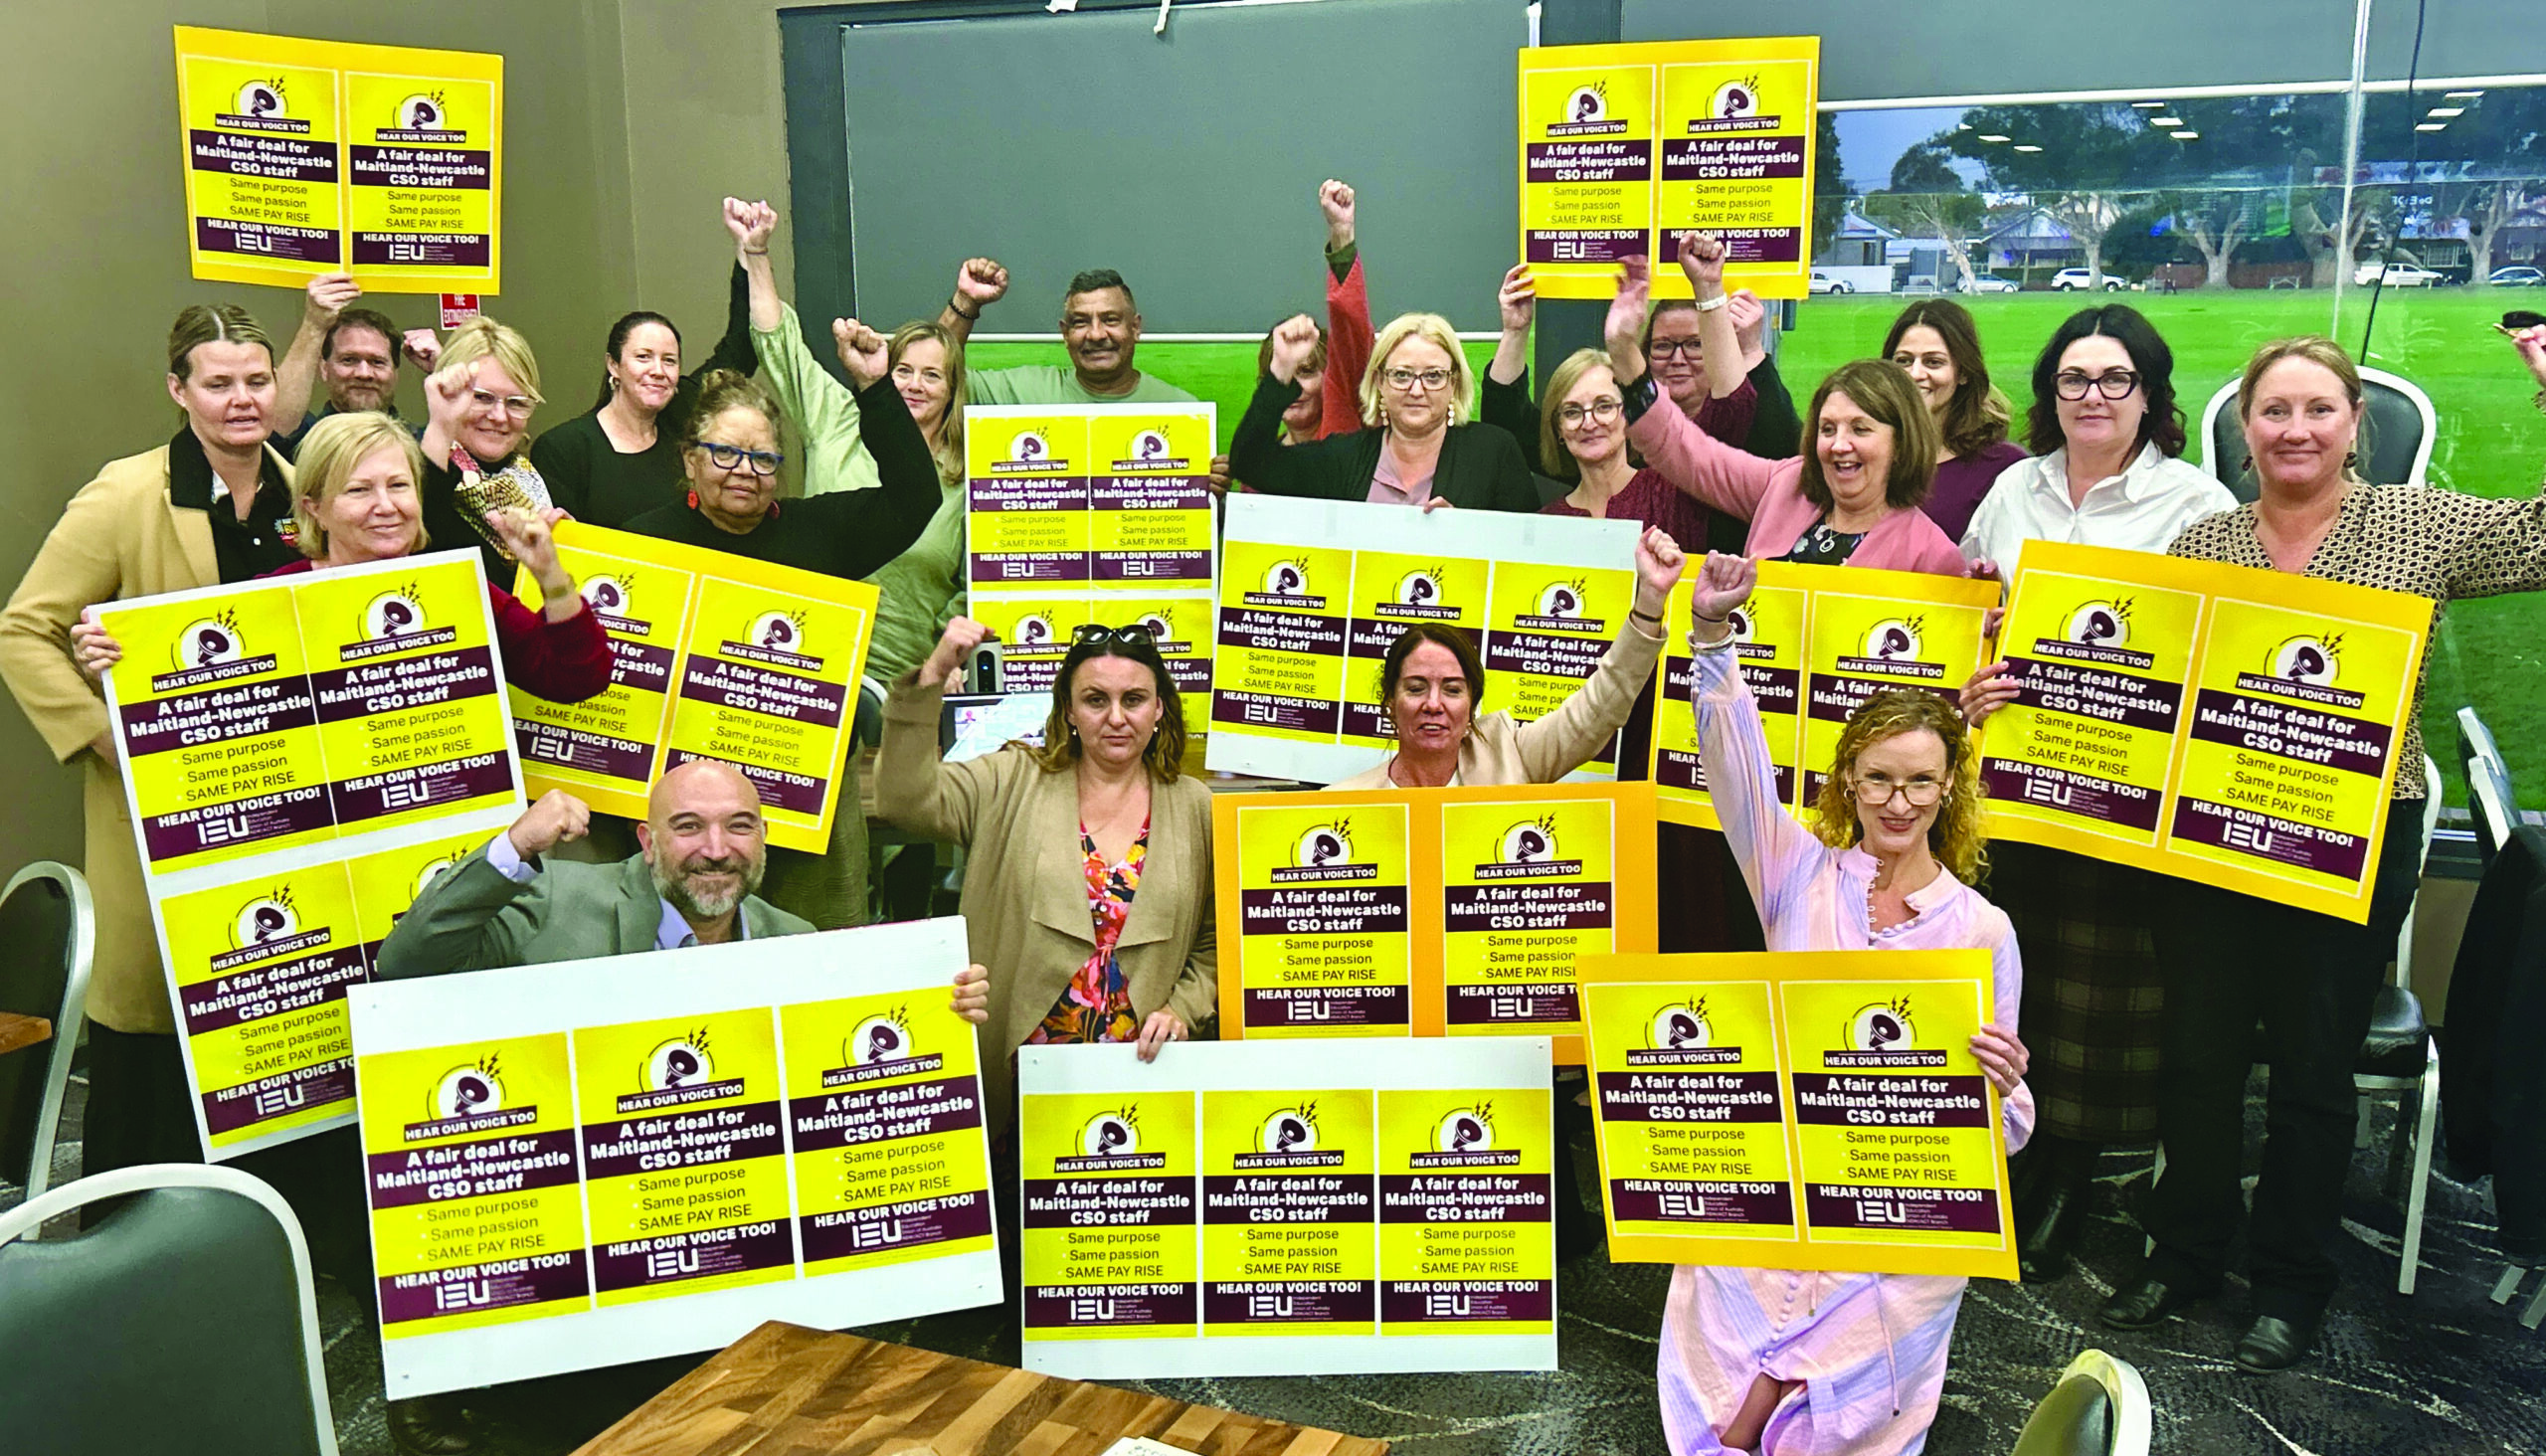 Hear our voice too! Members vote to take protected action